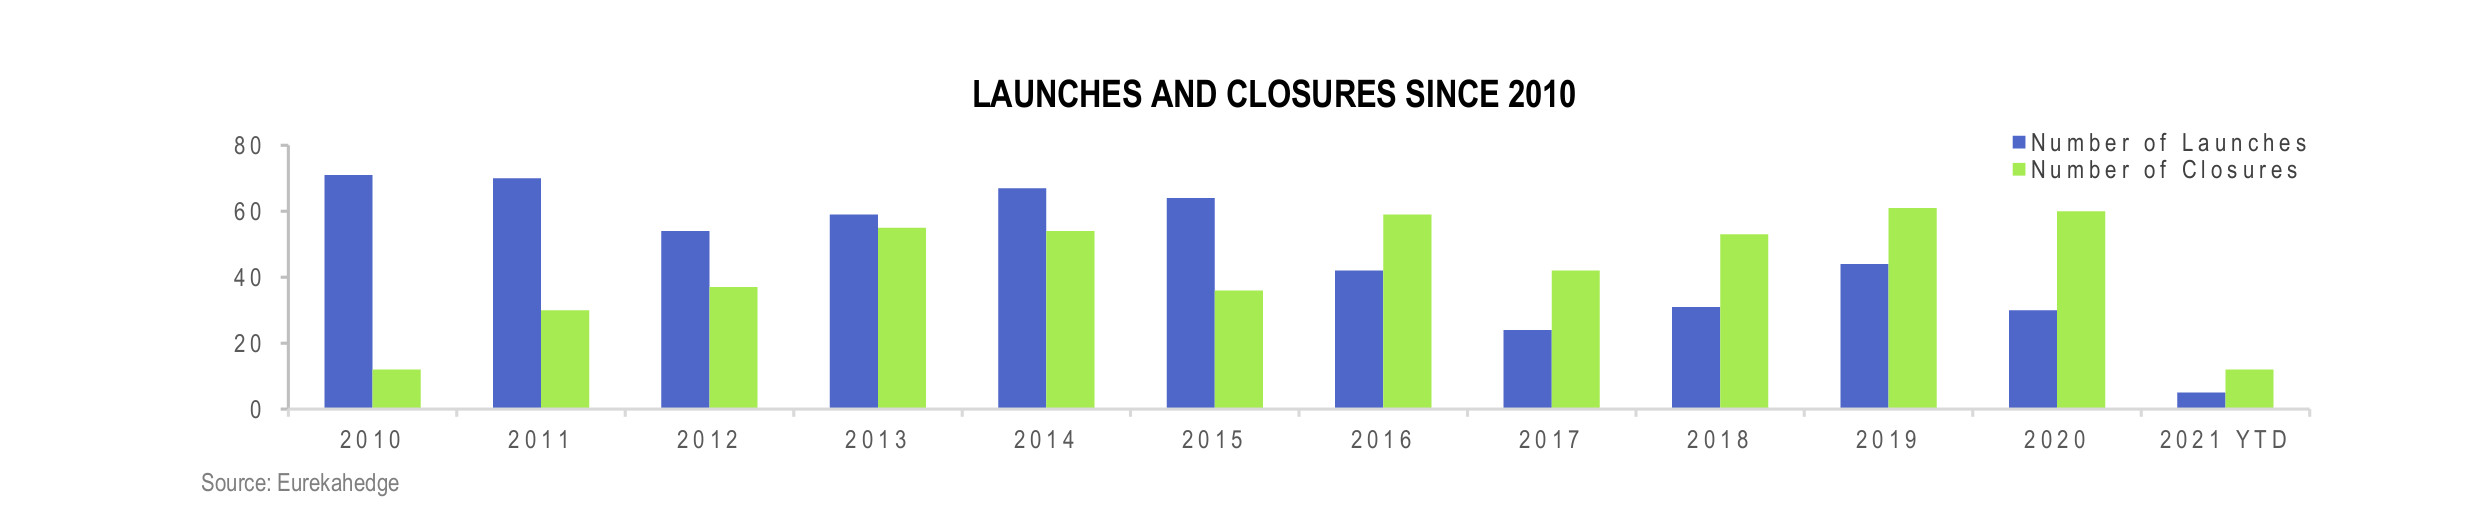 UCITS Hedge Funds Infographic June 2021 - Launches and Closures